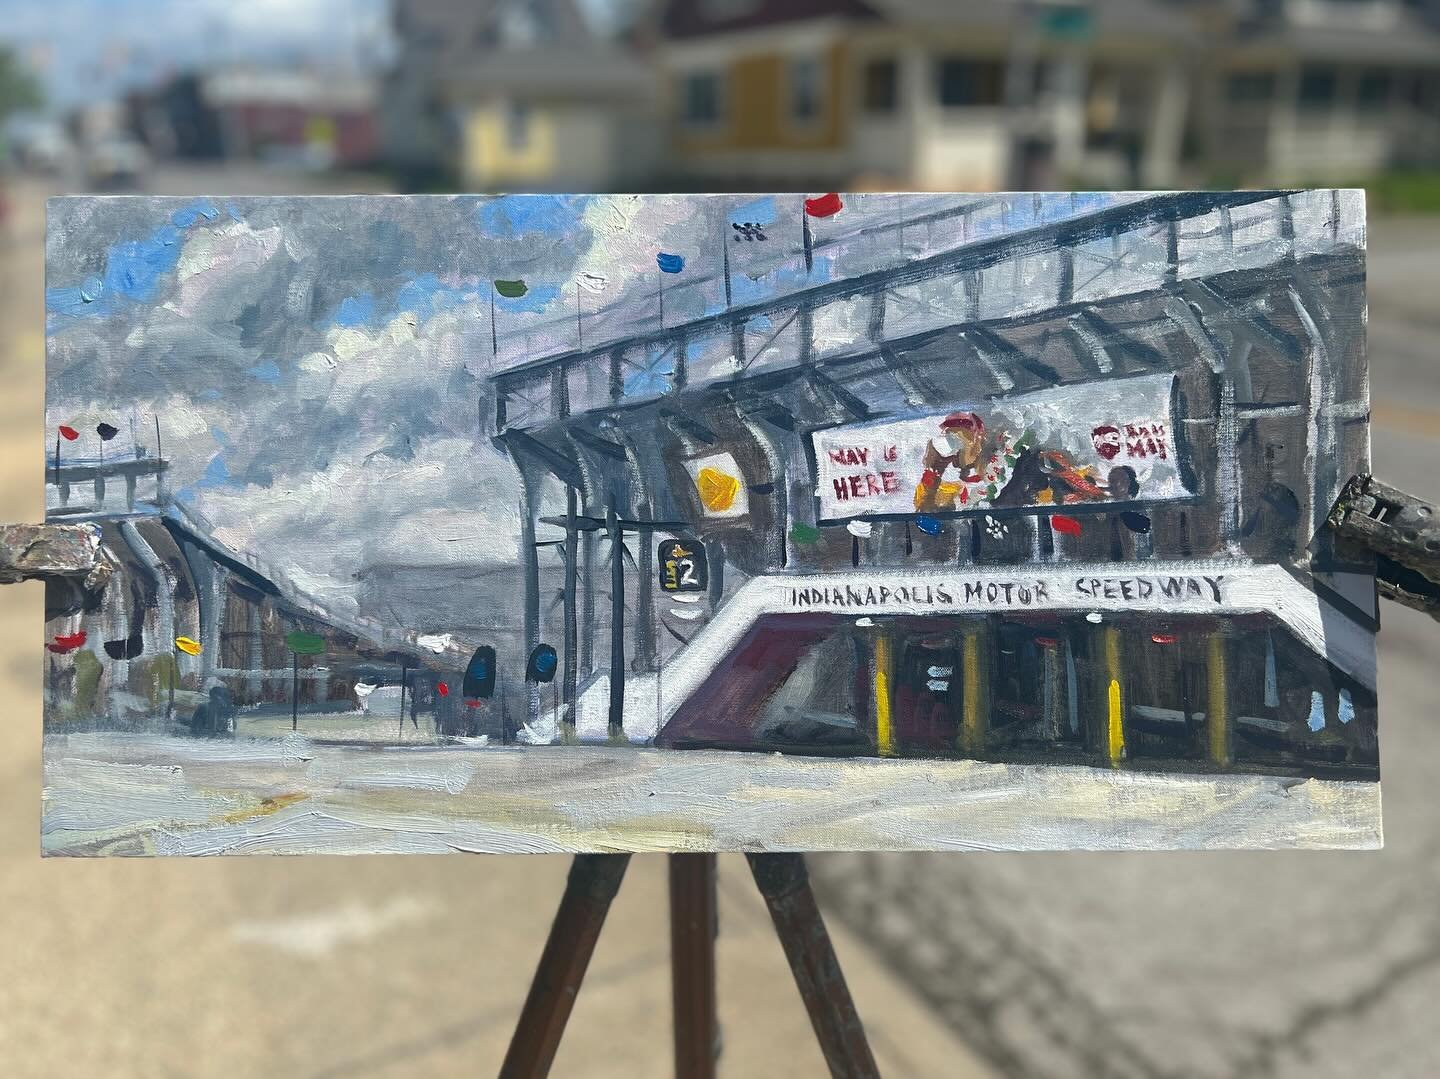 Gate 2 @indianapolismotorspeedway 12x24&rdquo; oil - it was a windy one today!!!! I had to hold down my easel most of this painting. #thisismay #indy500 #ims #indianapolismotorspeedway #pleinair #pleinairpainting #oilpainting #ampersand_art #royaltal